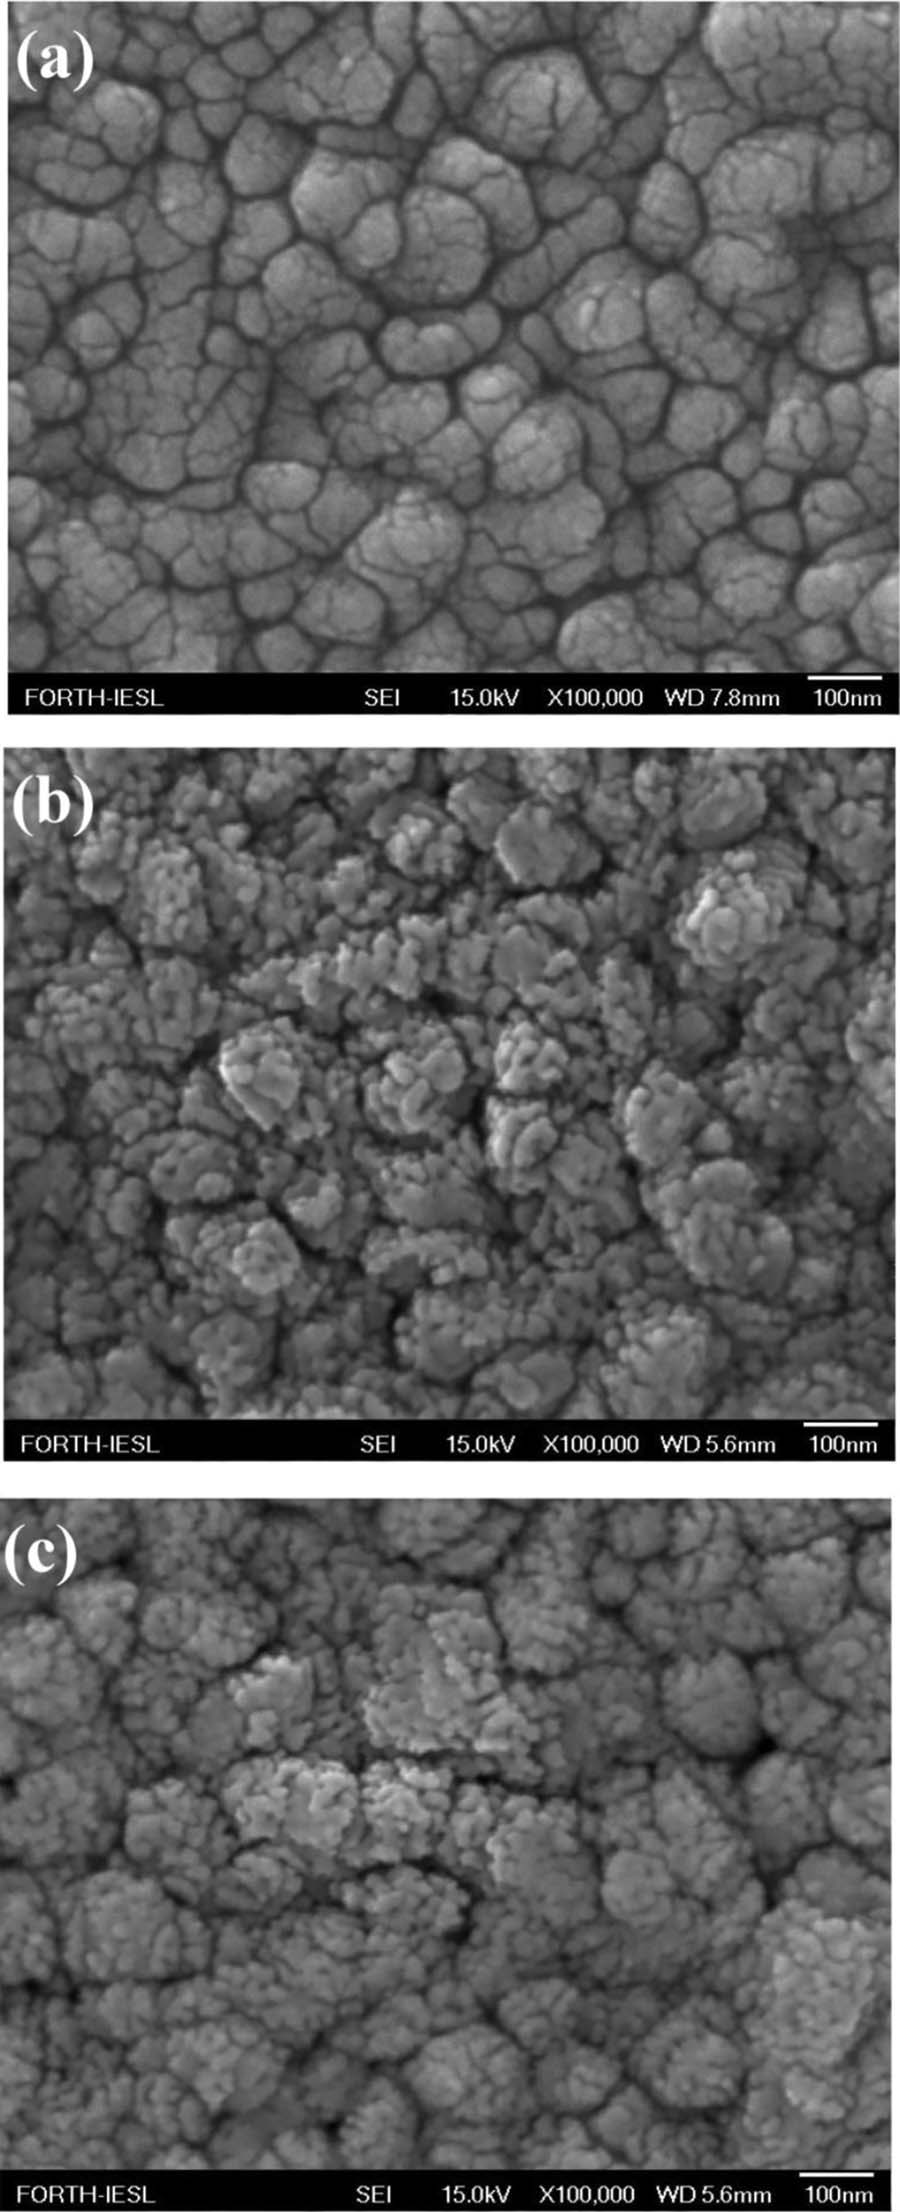 H580 Journal of The Electrochemical Society, 162 (9) H579-H582 (2015) Figure 1. XRD of LPCVD monoclinic WO 3 coatings at 400 C for 15 min using O 2 flow rate of 100 sccm.